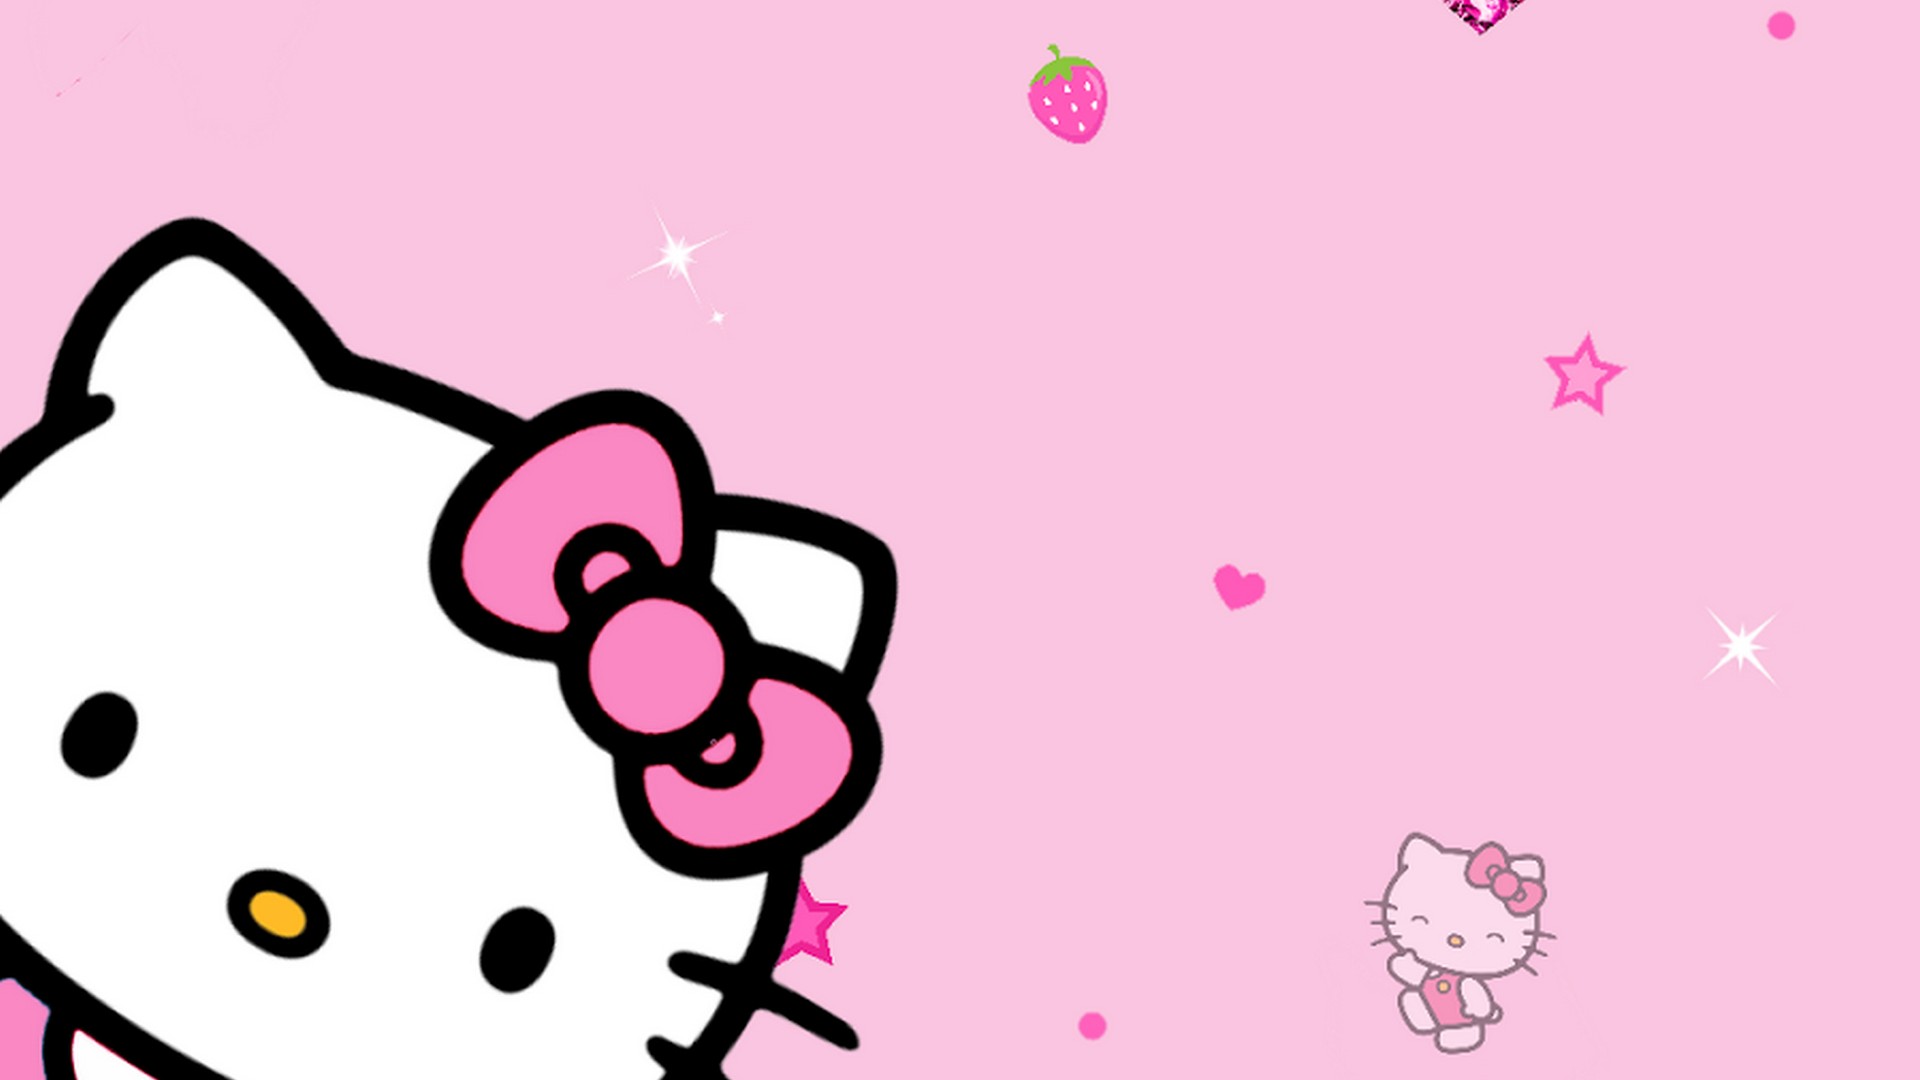 Wallpaper HD Kitty with image resolution 1920x1080 pixel. You can make this wallpaper for your Desktop Computer Backgrounds, Mac Wallpapers, Android Lock screen or iPhone Screensavers